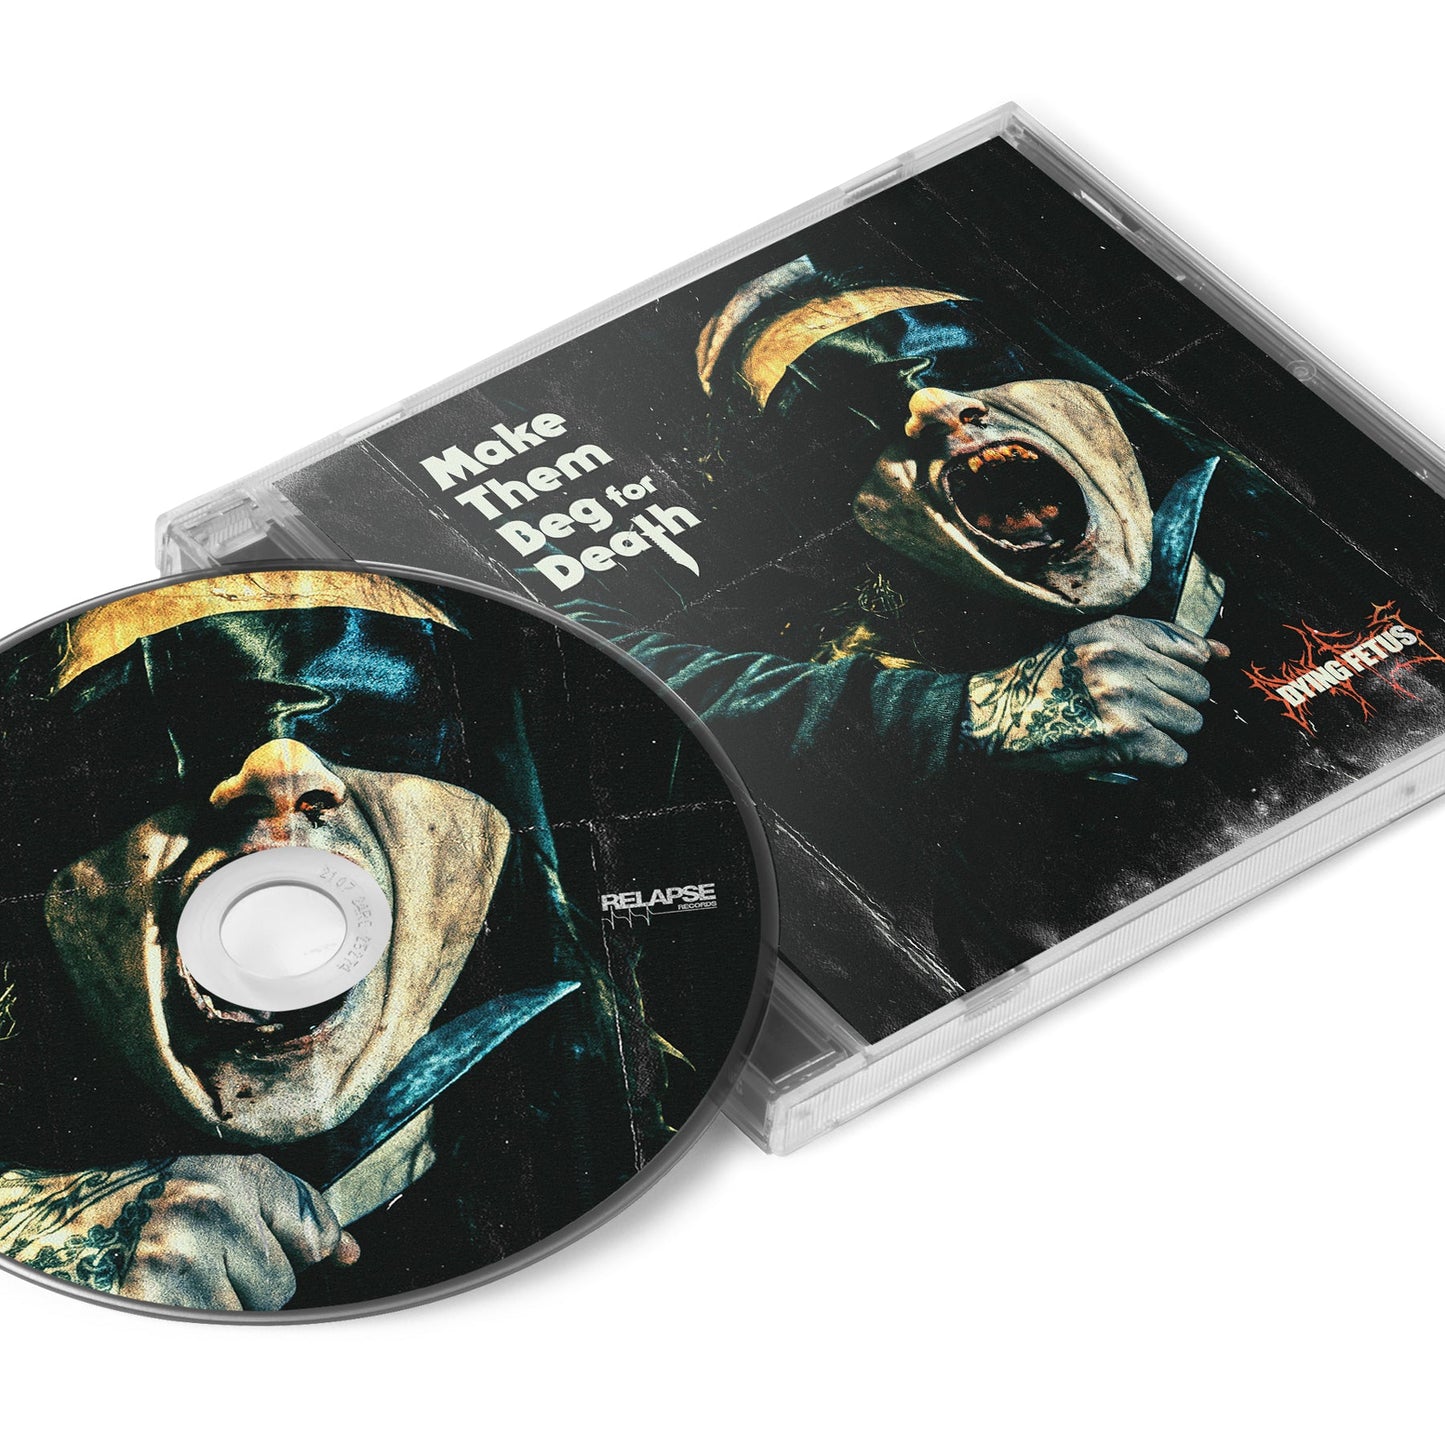 DYING FETUS - Make Them Beg For Death - CD (pre-order)